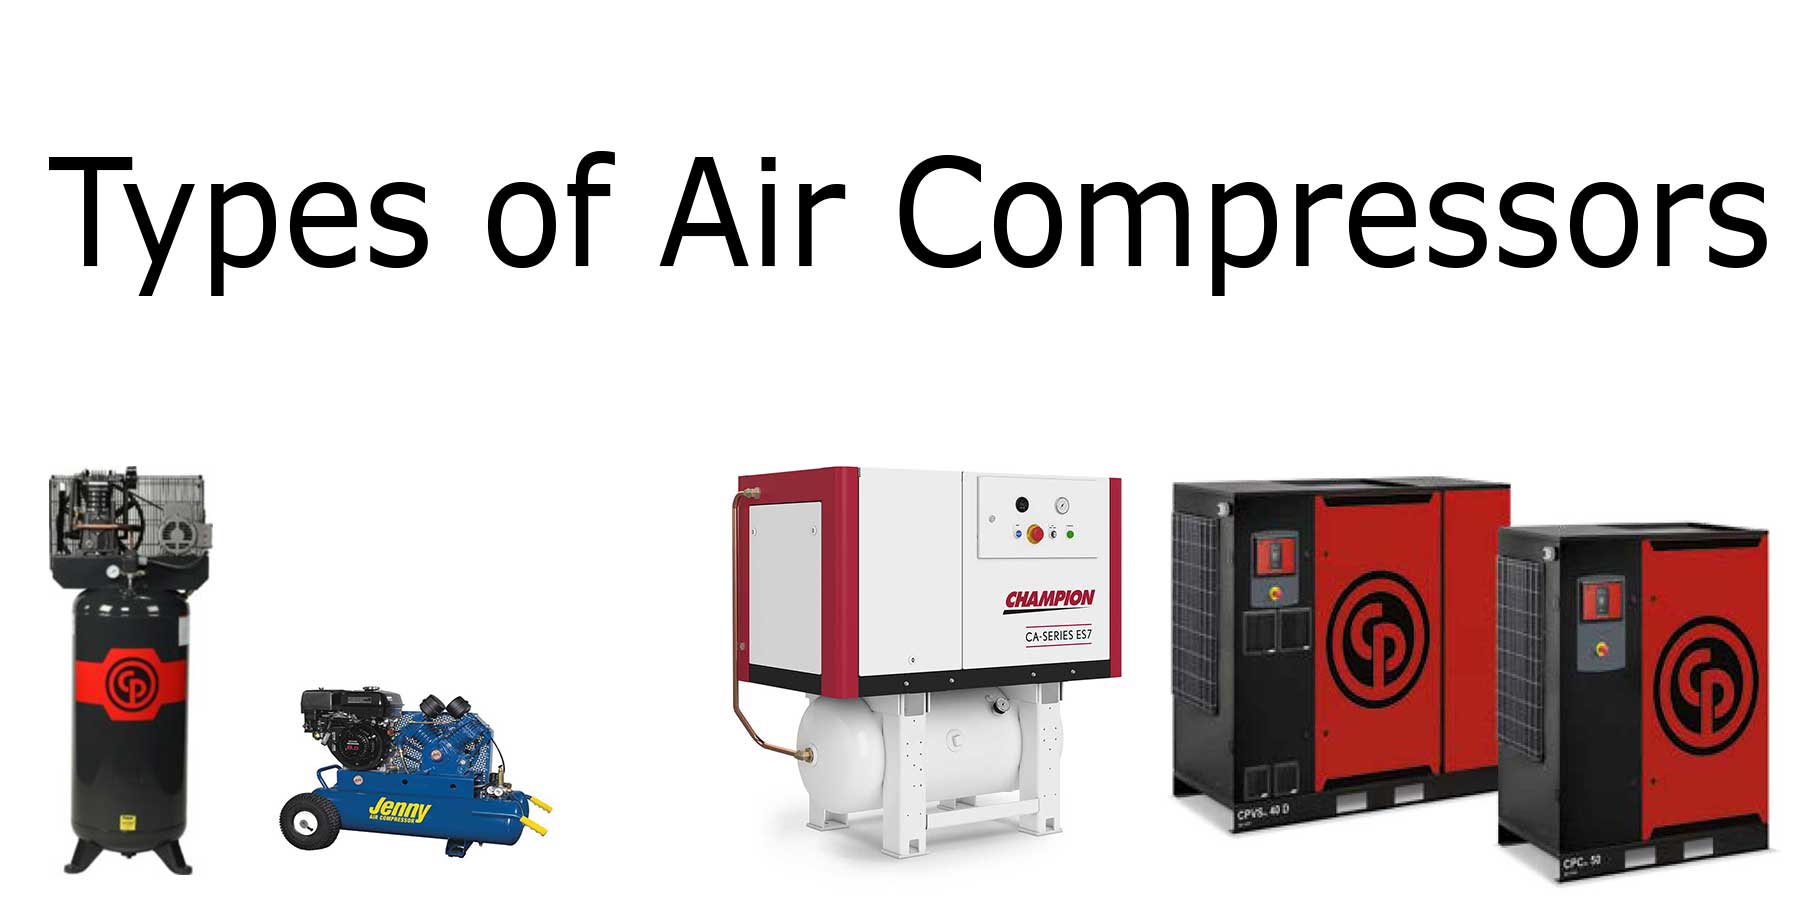 Types of Air Compressors